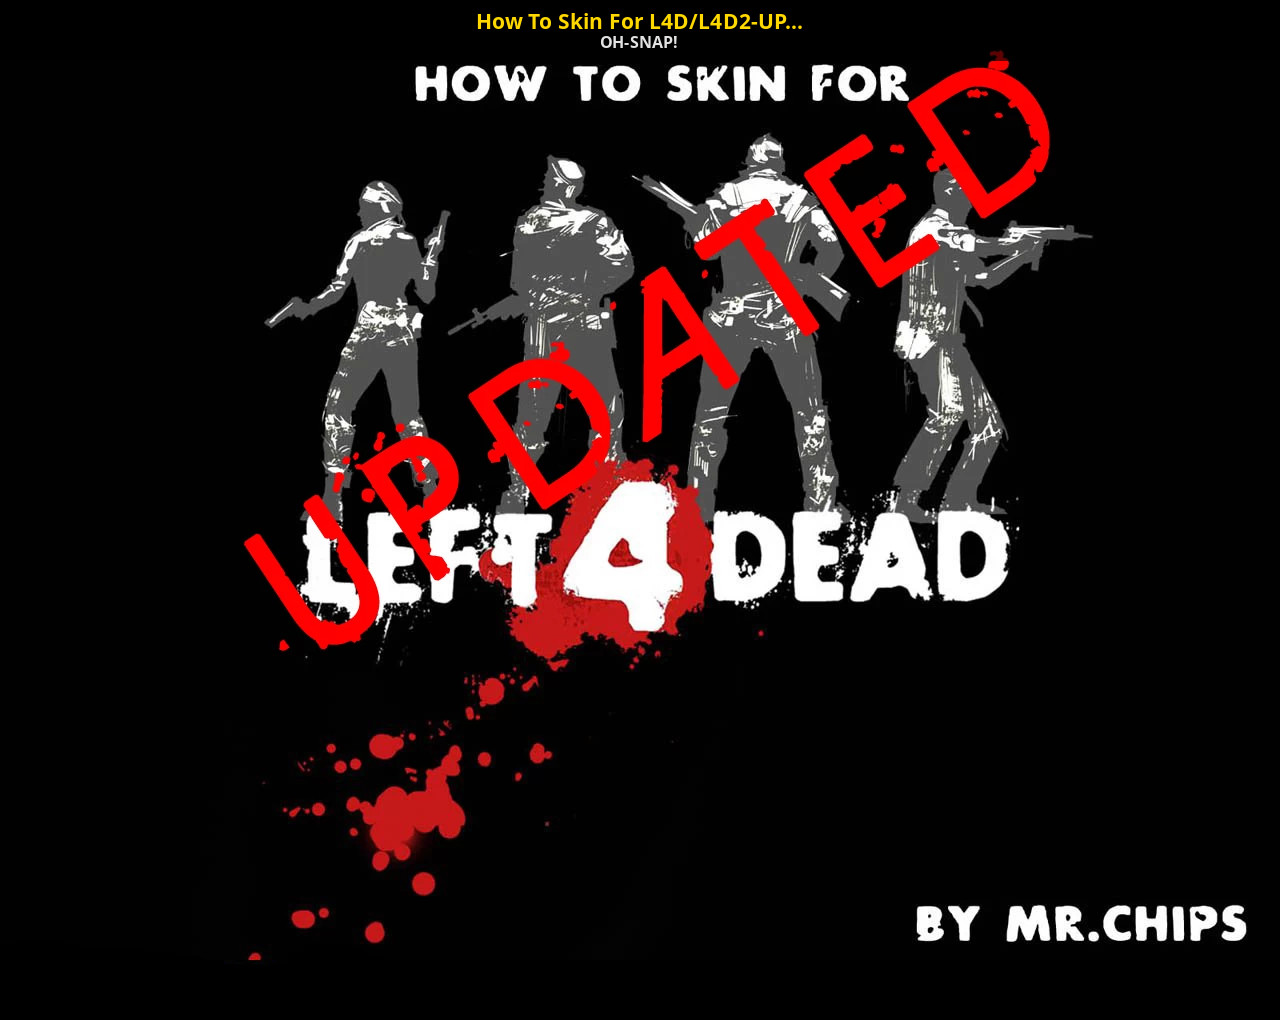 Collections : How To Skin For L4D/L4D2-UPDATED (1-03-10) [Left 4 Dead ...